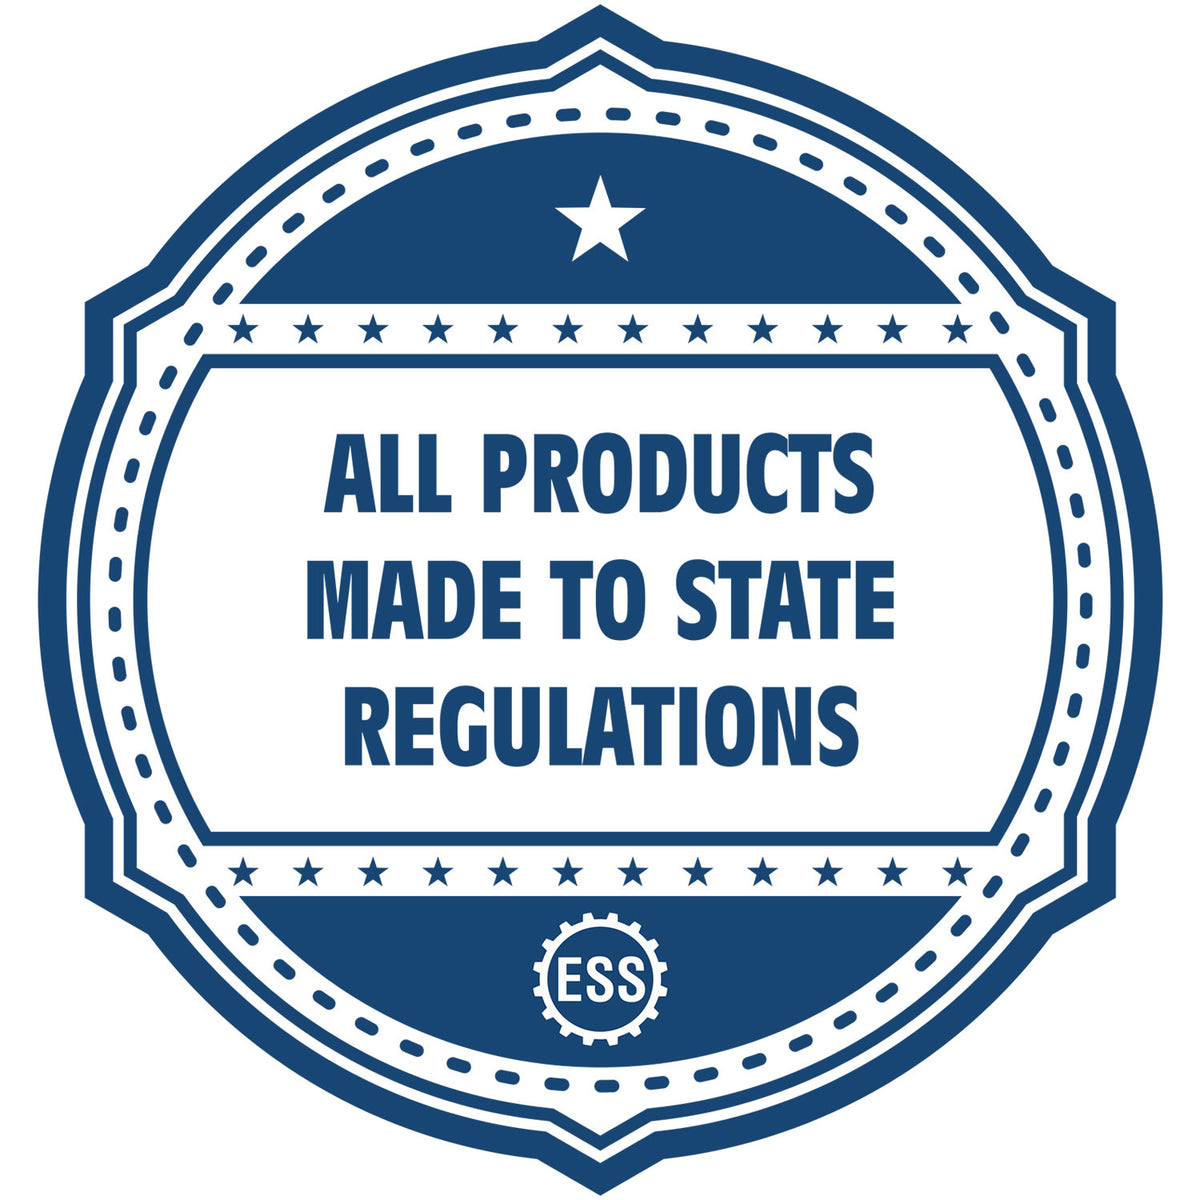 An icon or badge element for the Extended Long Reach Indiana Architect Seal Embosser showing that this product is made in compliance with state regulations.